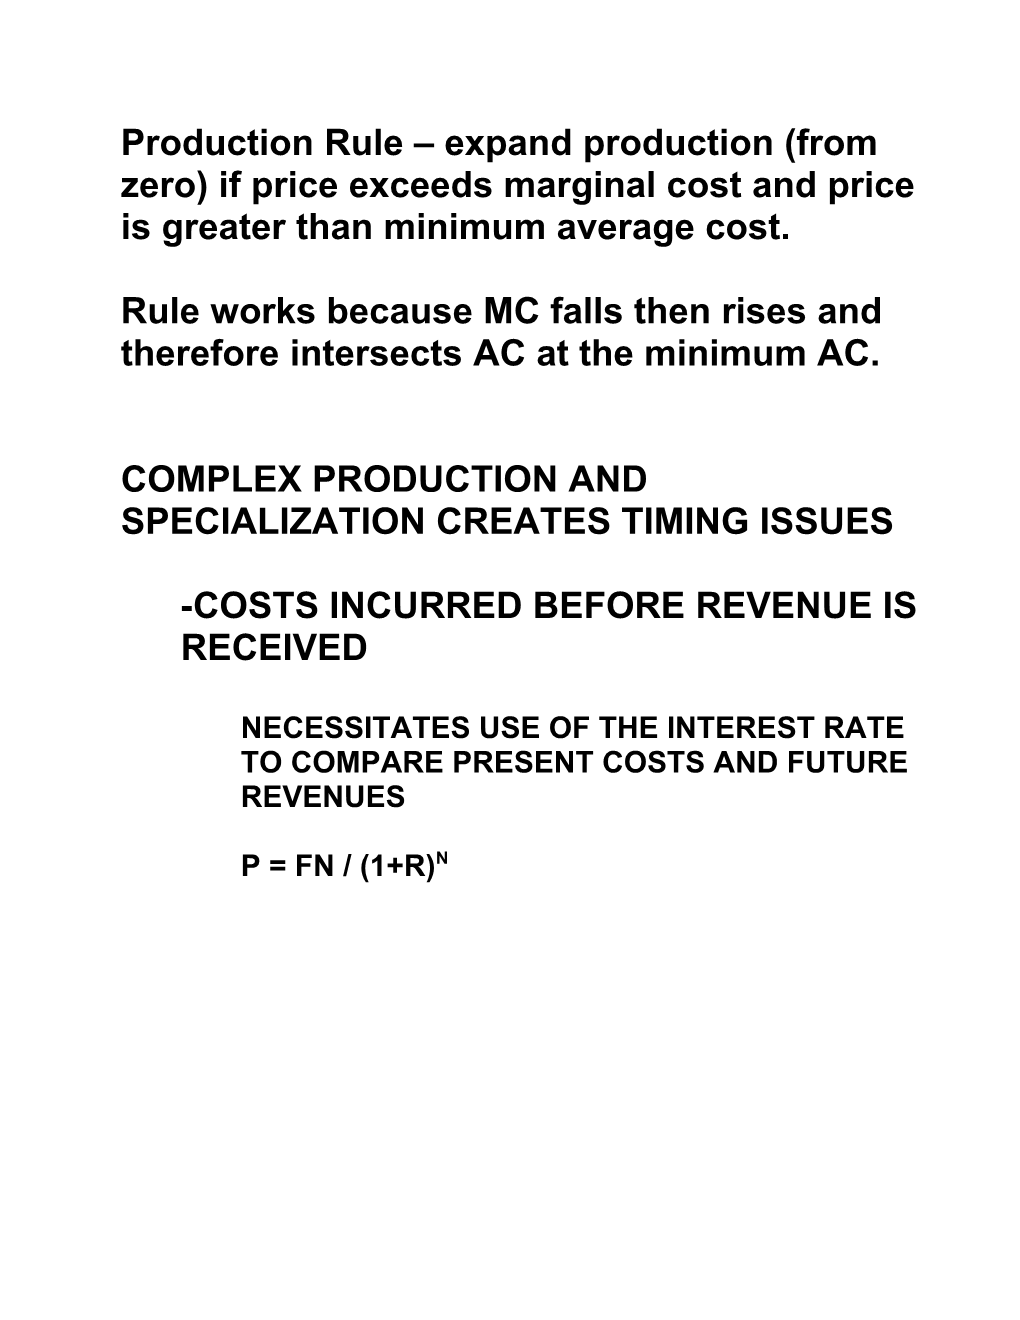 Production Rule Expand Production (From Zero) If Price Exceeds Marginal Cost and Price